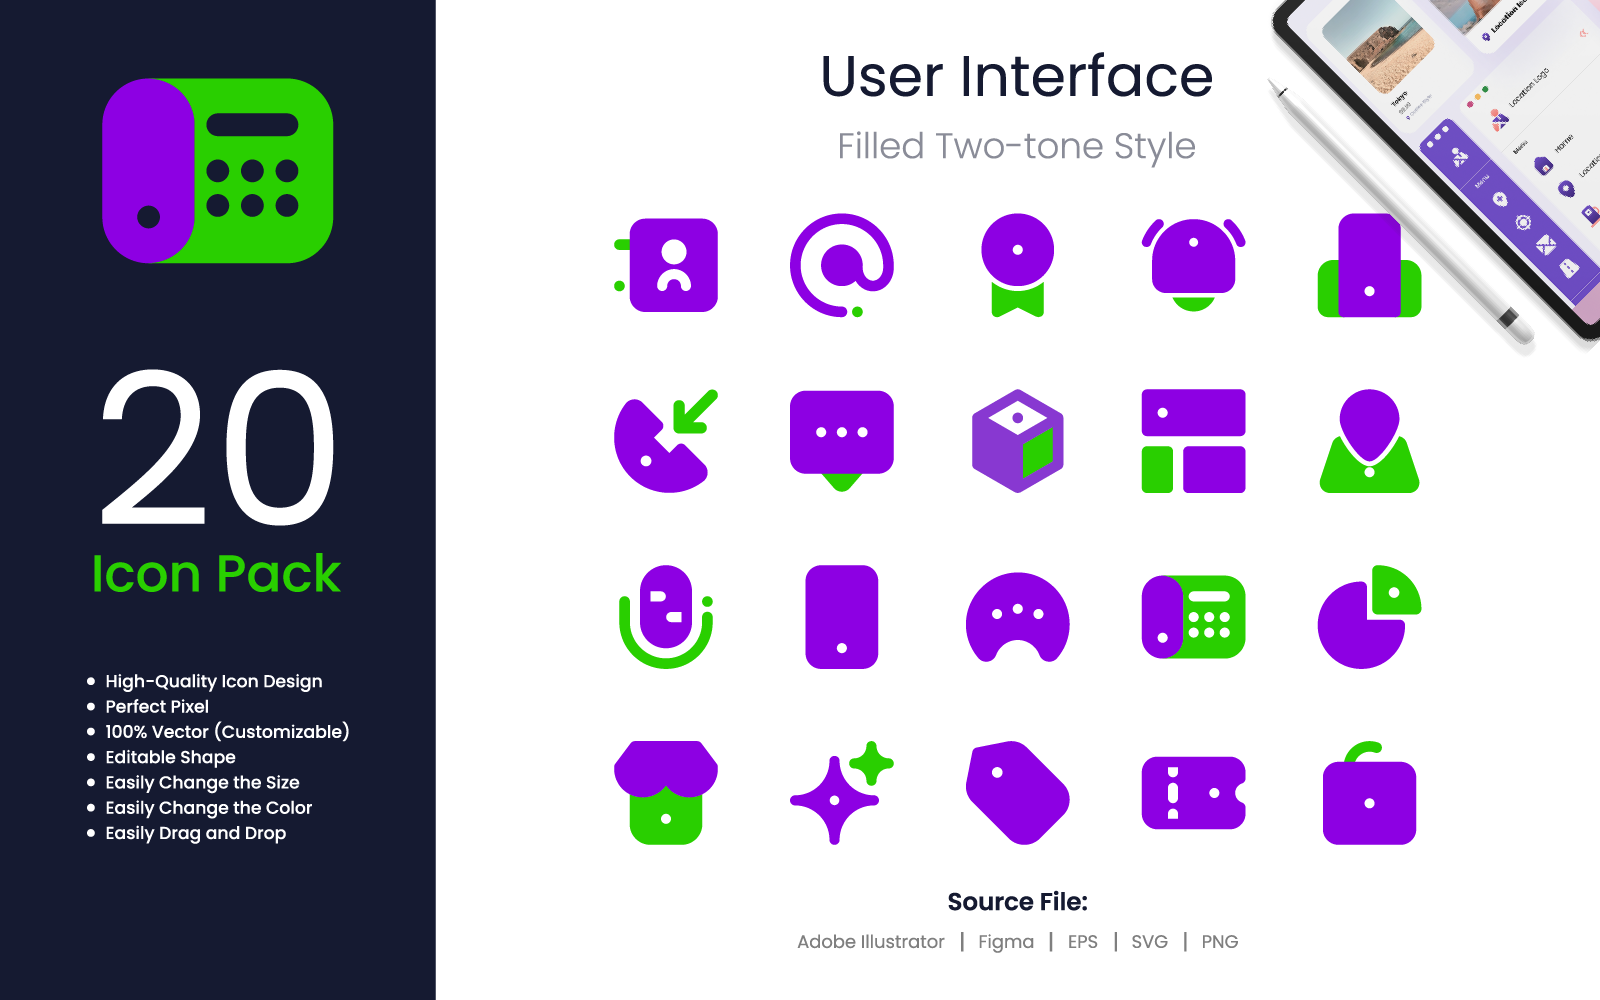 User Interface Icon Pack Filled Two-Tone Style 3